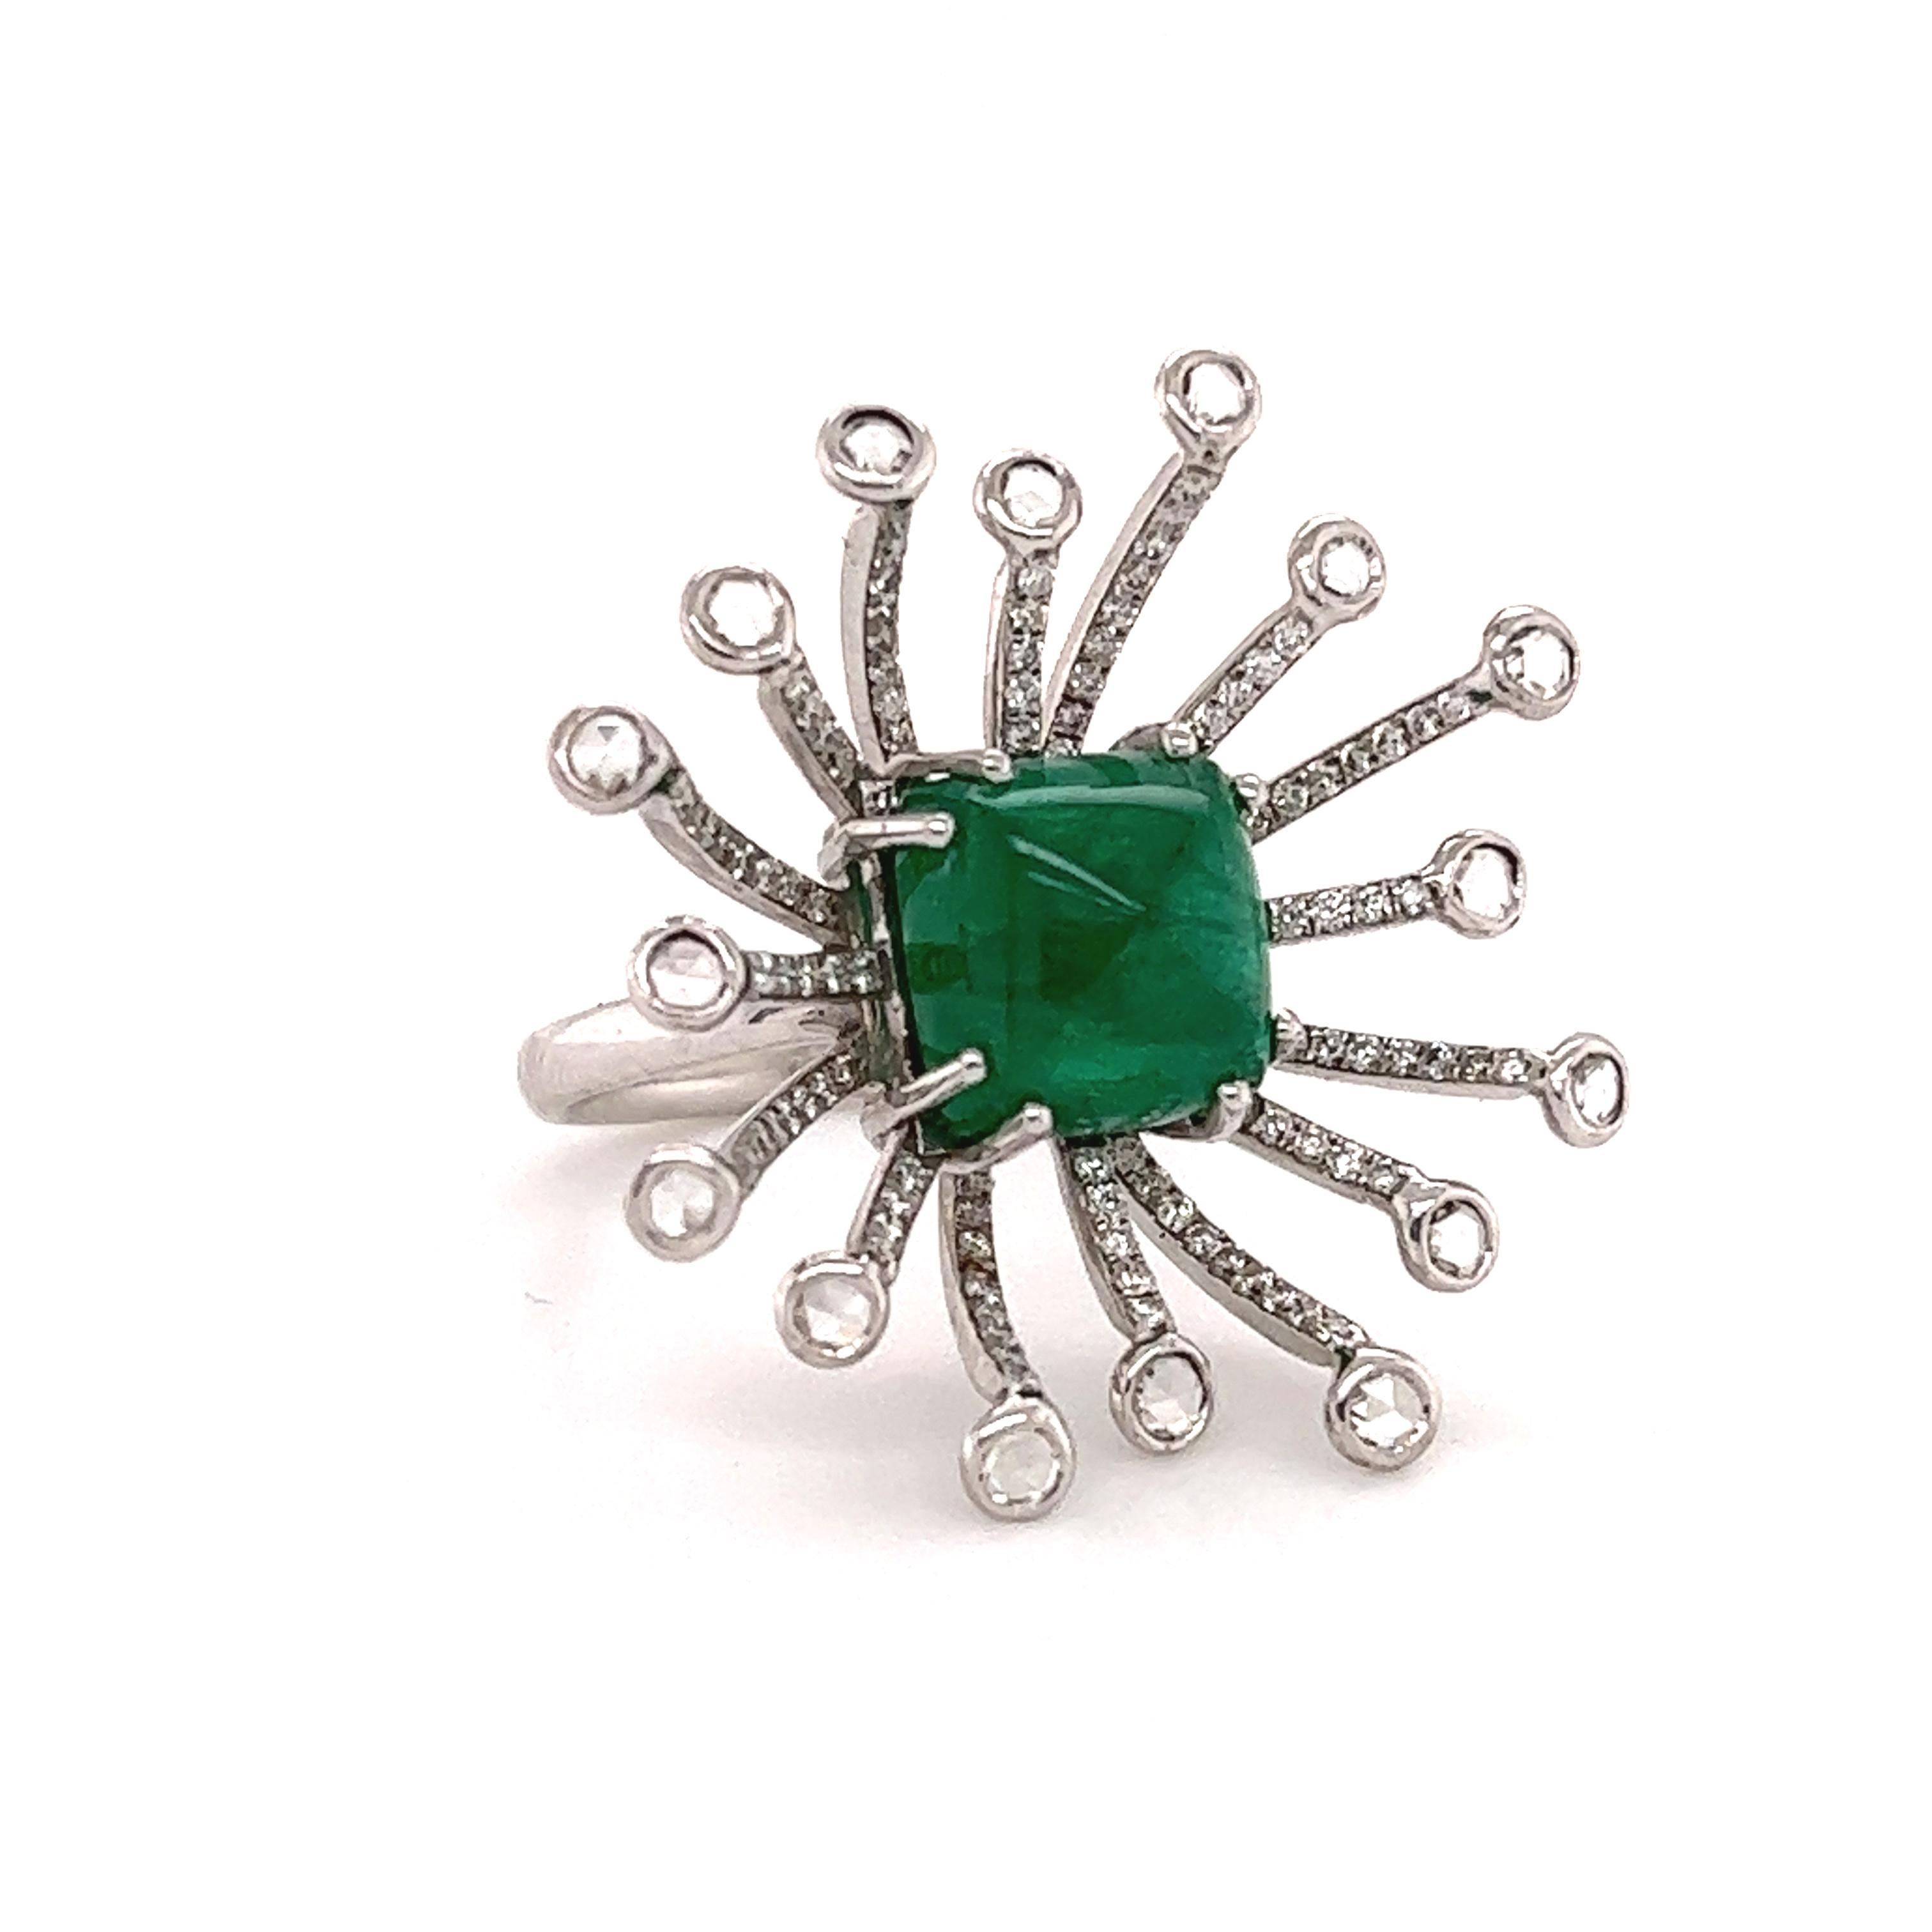 Fantastic design seen on this 18k white gold ring. This exceptional ring shows a modern design with vintage touches. Truly made by master craftsman. The ring showcases a center sugarloaf cut vibrant green emerald gemstone weighing approximately 4.50